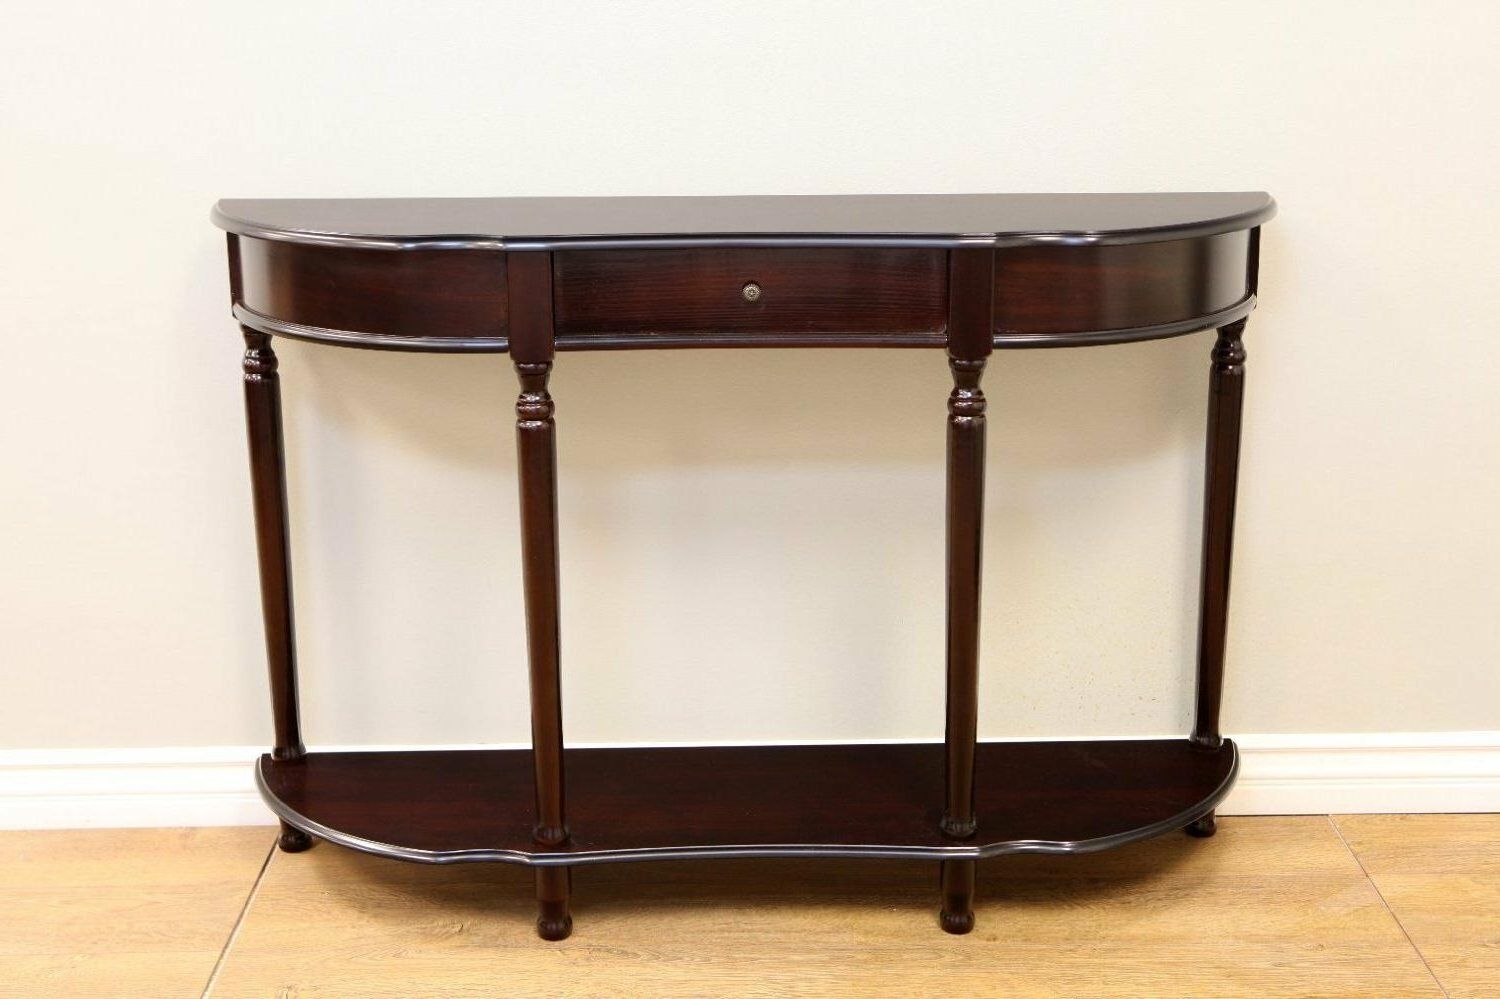 Console Sofa Table Storage Table Drawer Cherry Finish With Famous Espresso Wood Storage Console Tables (View 5 of 10)